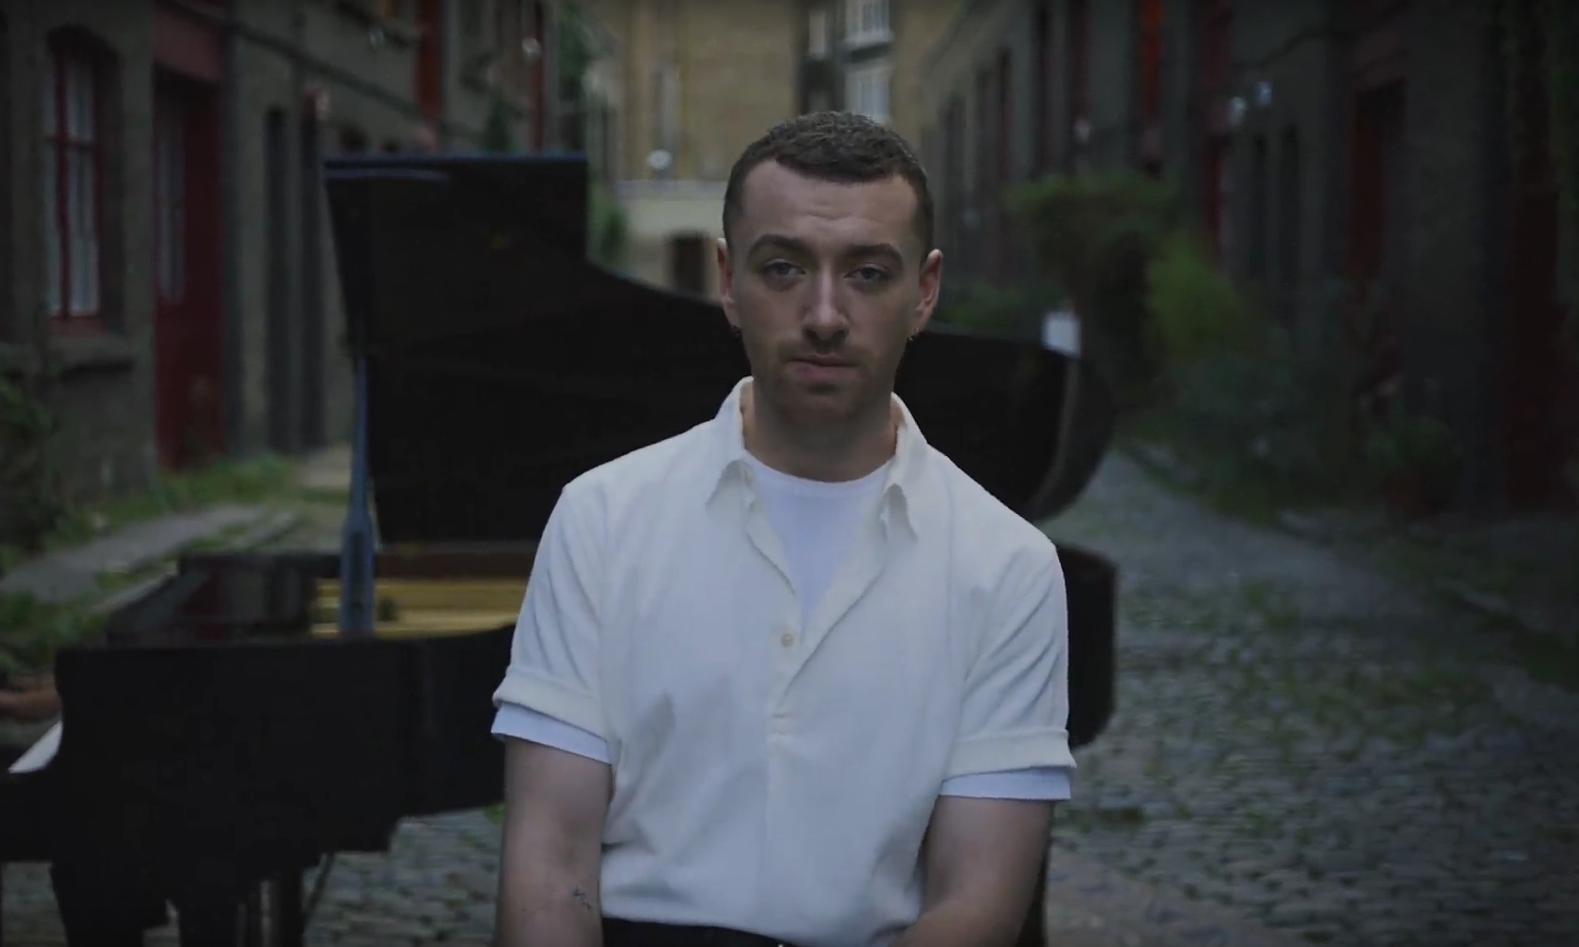 LE CLIP DU JOUR | SAM SMITH – “TOO GOOD AT GOODBYES” - TRACE1579 x 947